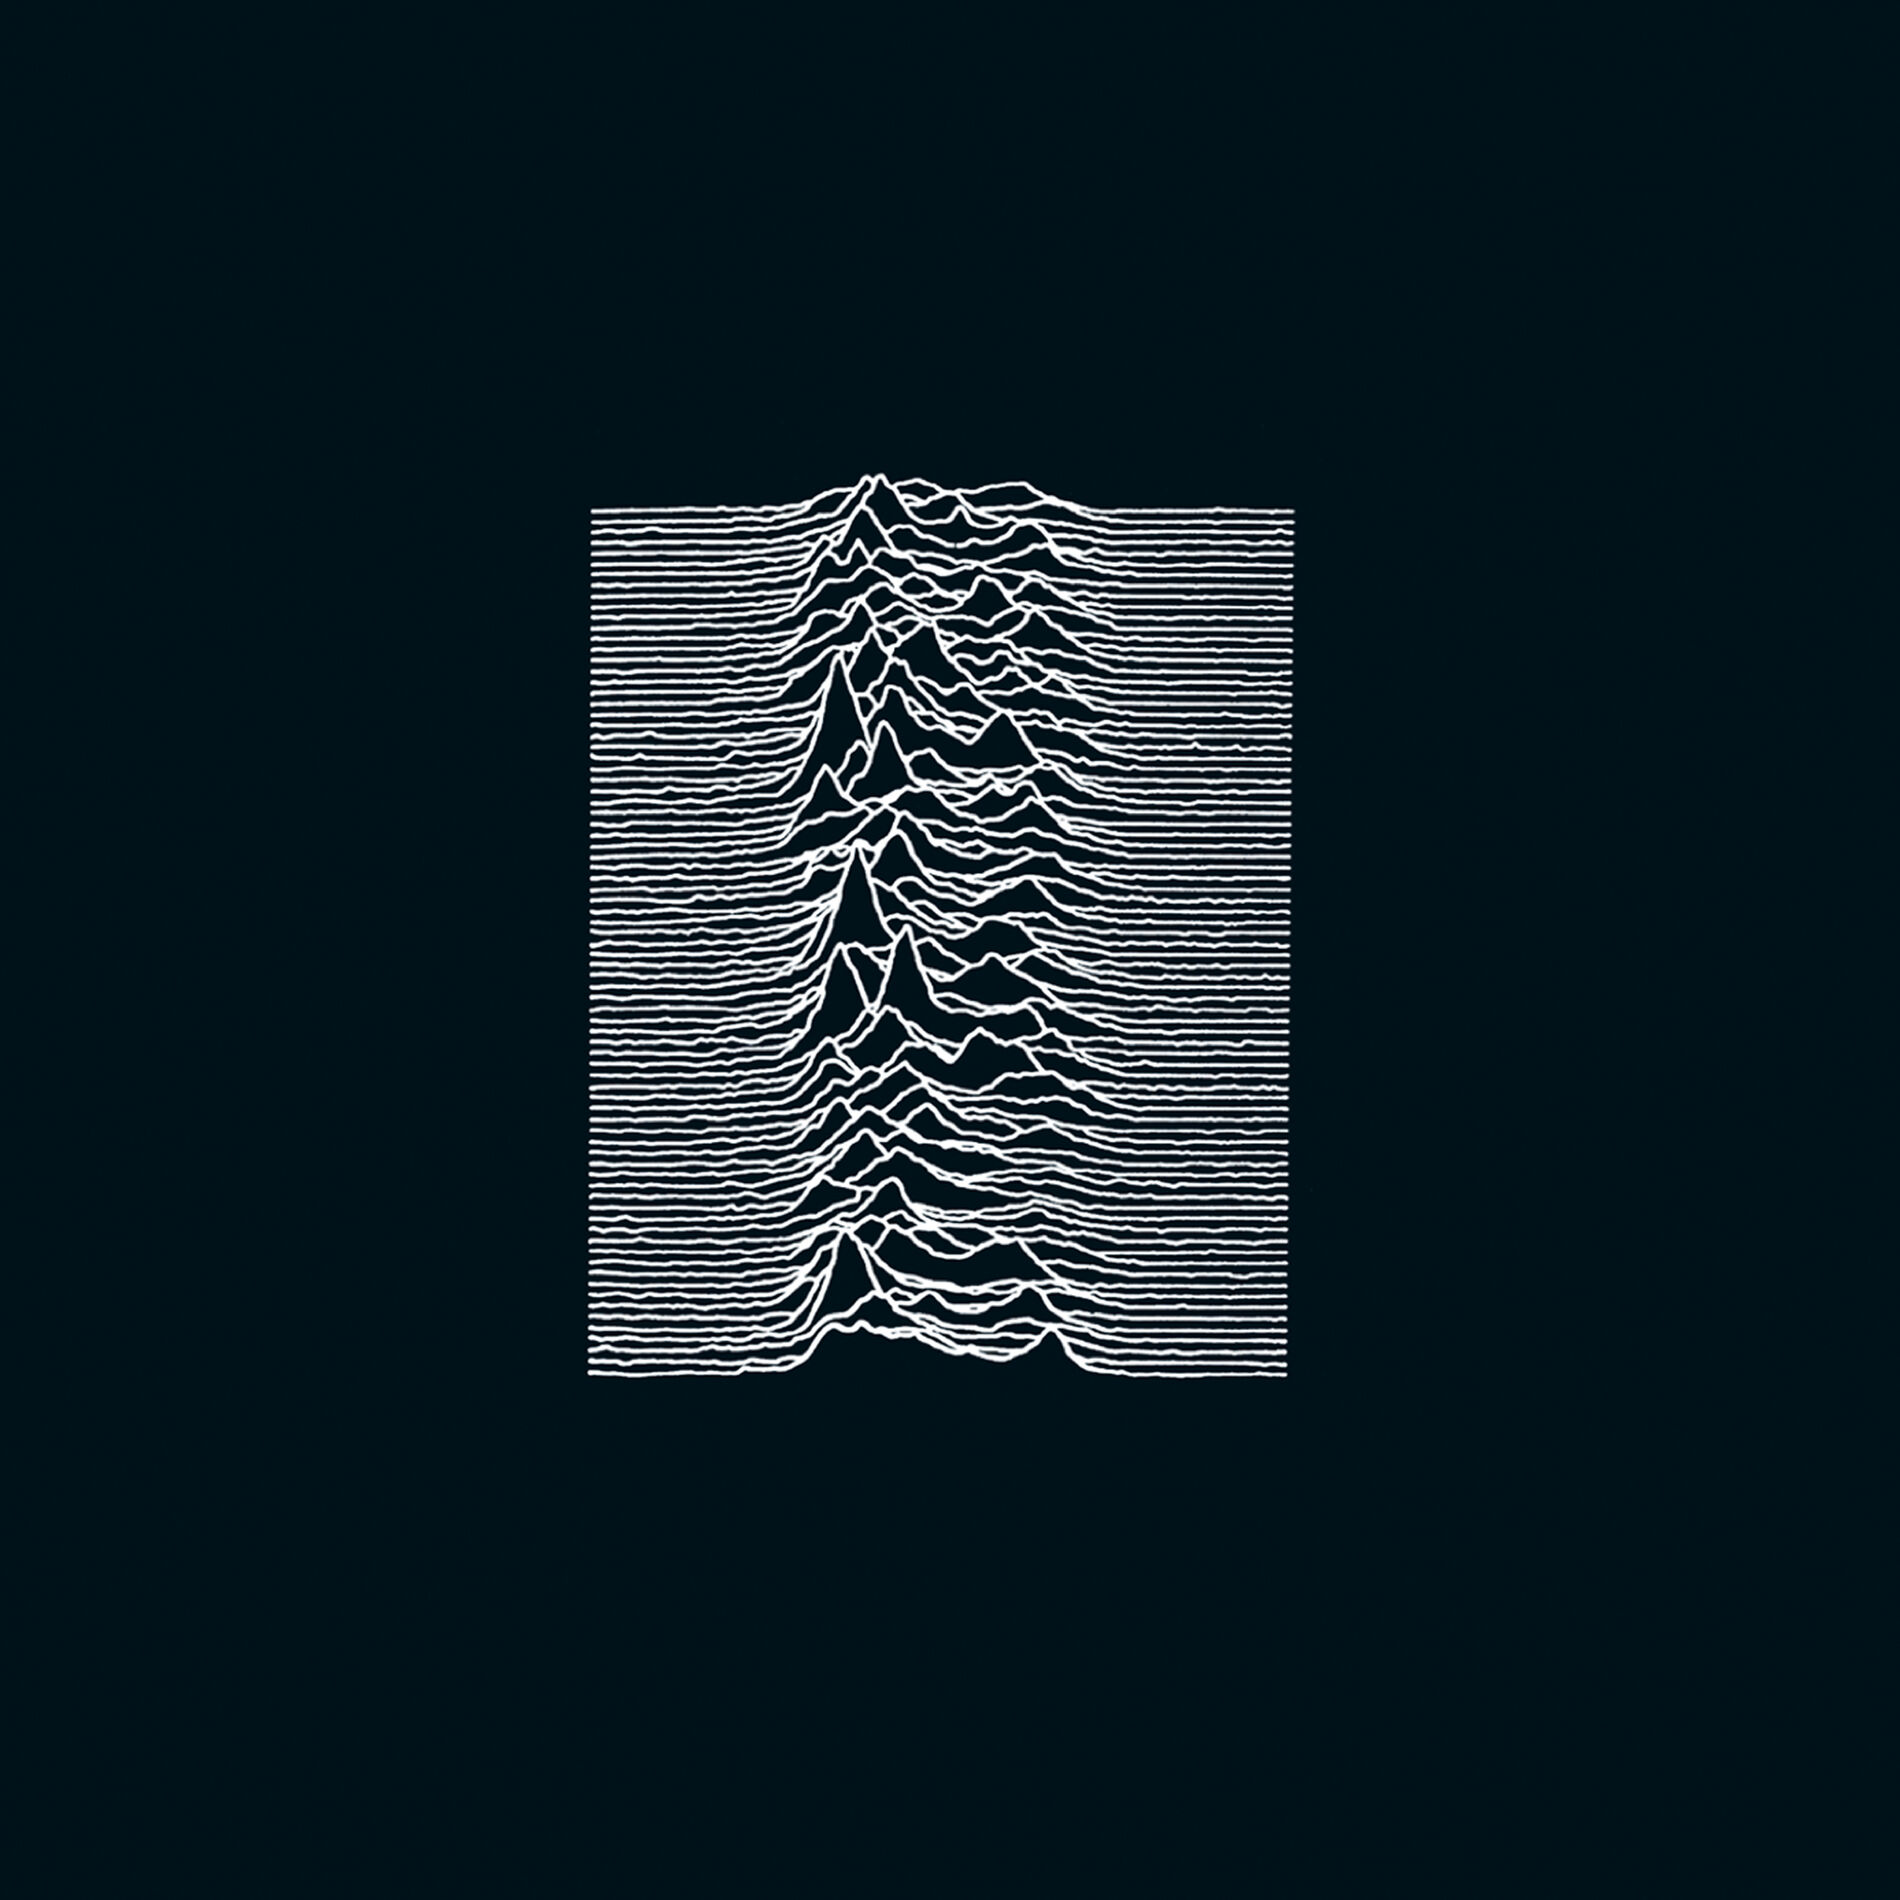 Joy Division - Unknown Pleasures (Collector's Edition): lyrics and 